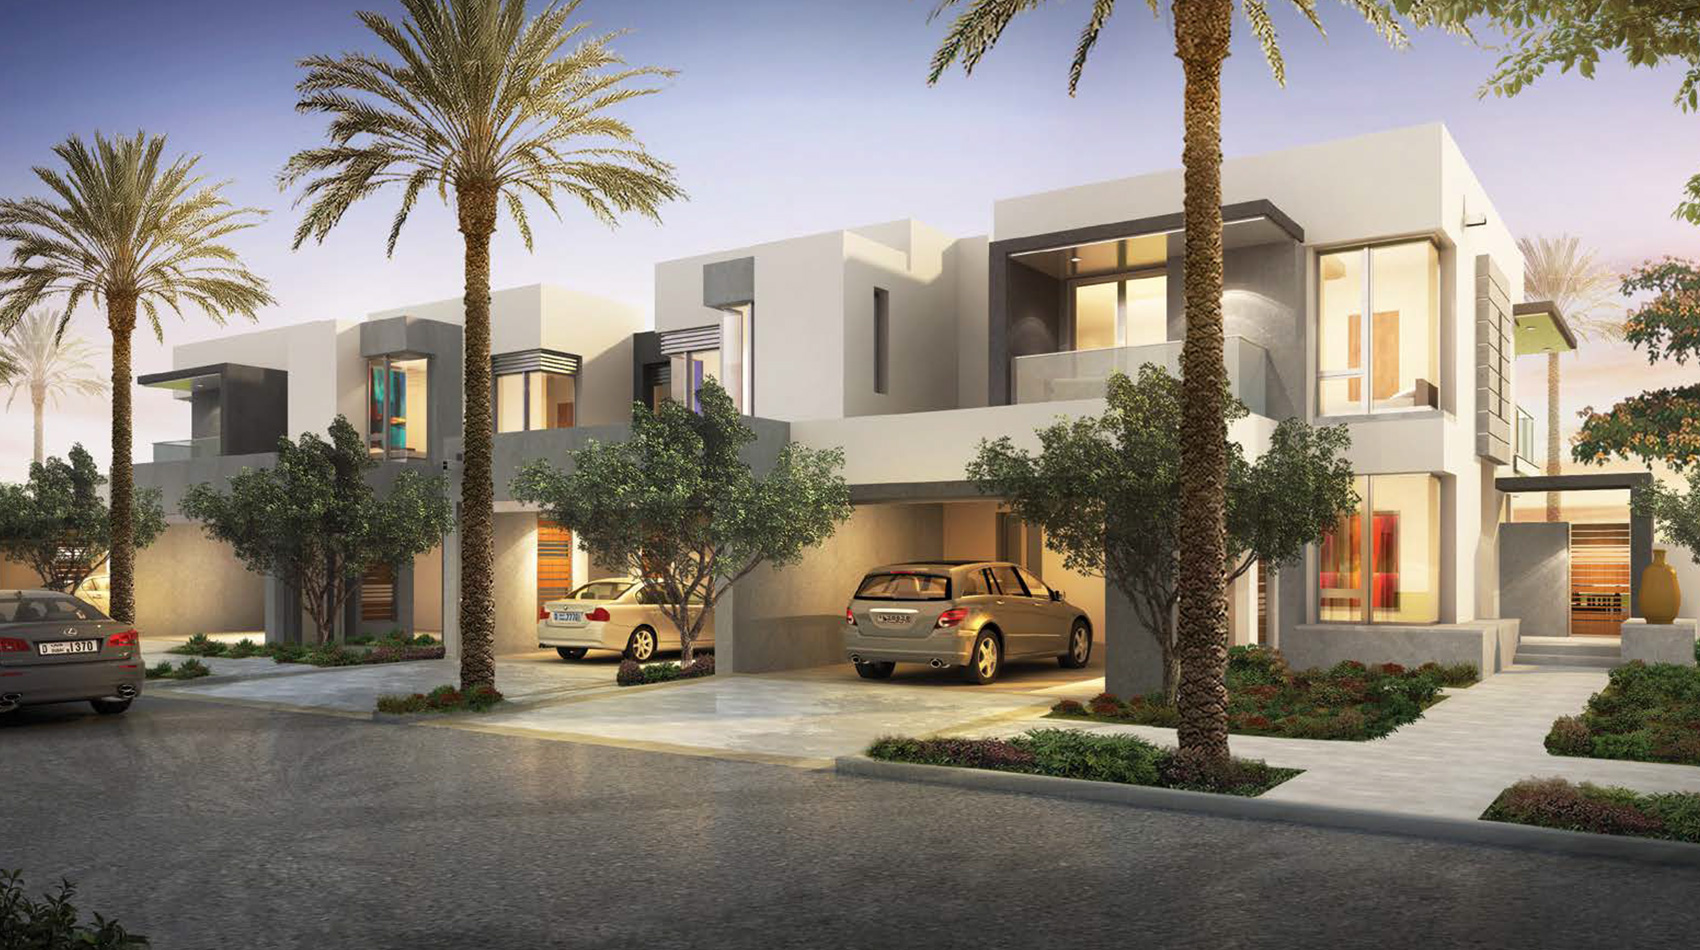 Townhouses for Rent in Dubai